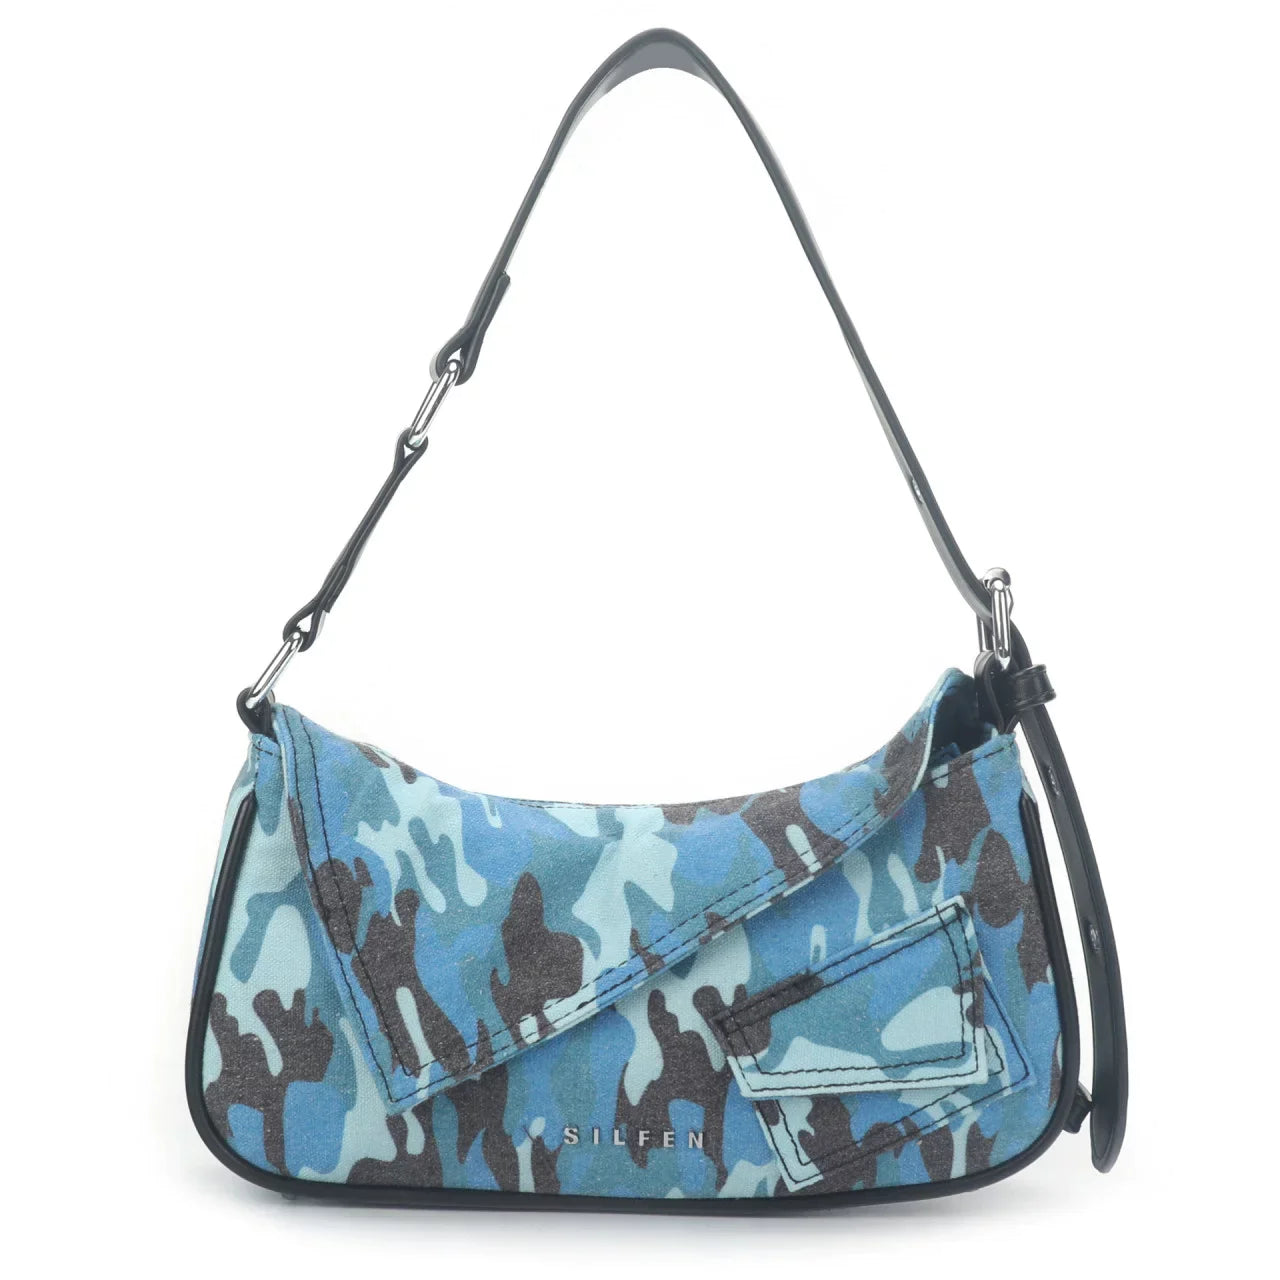 THE CLEO SHOULDER MINI BAG - CAMOUFLAGE BLUE - EXCLUSIVE Bags from SILFEN - Just $70! SHOP NOW AT IAMINHATELOVE BOTH IN STORE FOR CYPRUS AND ONLINE WORLDWIDE